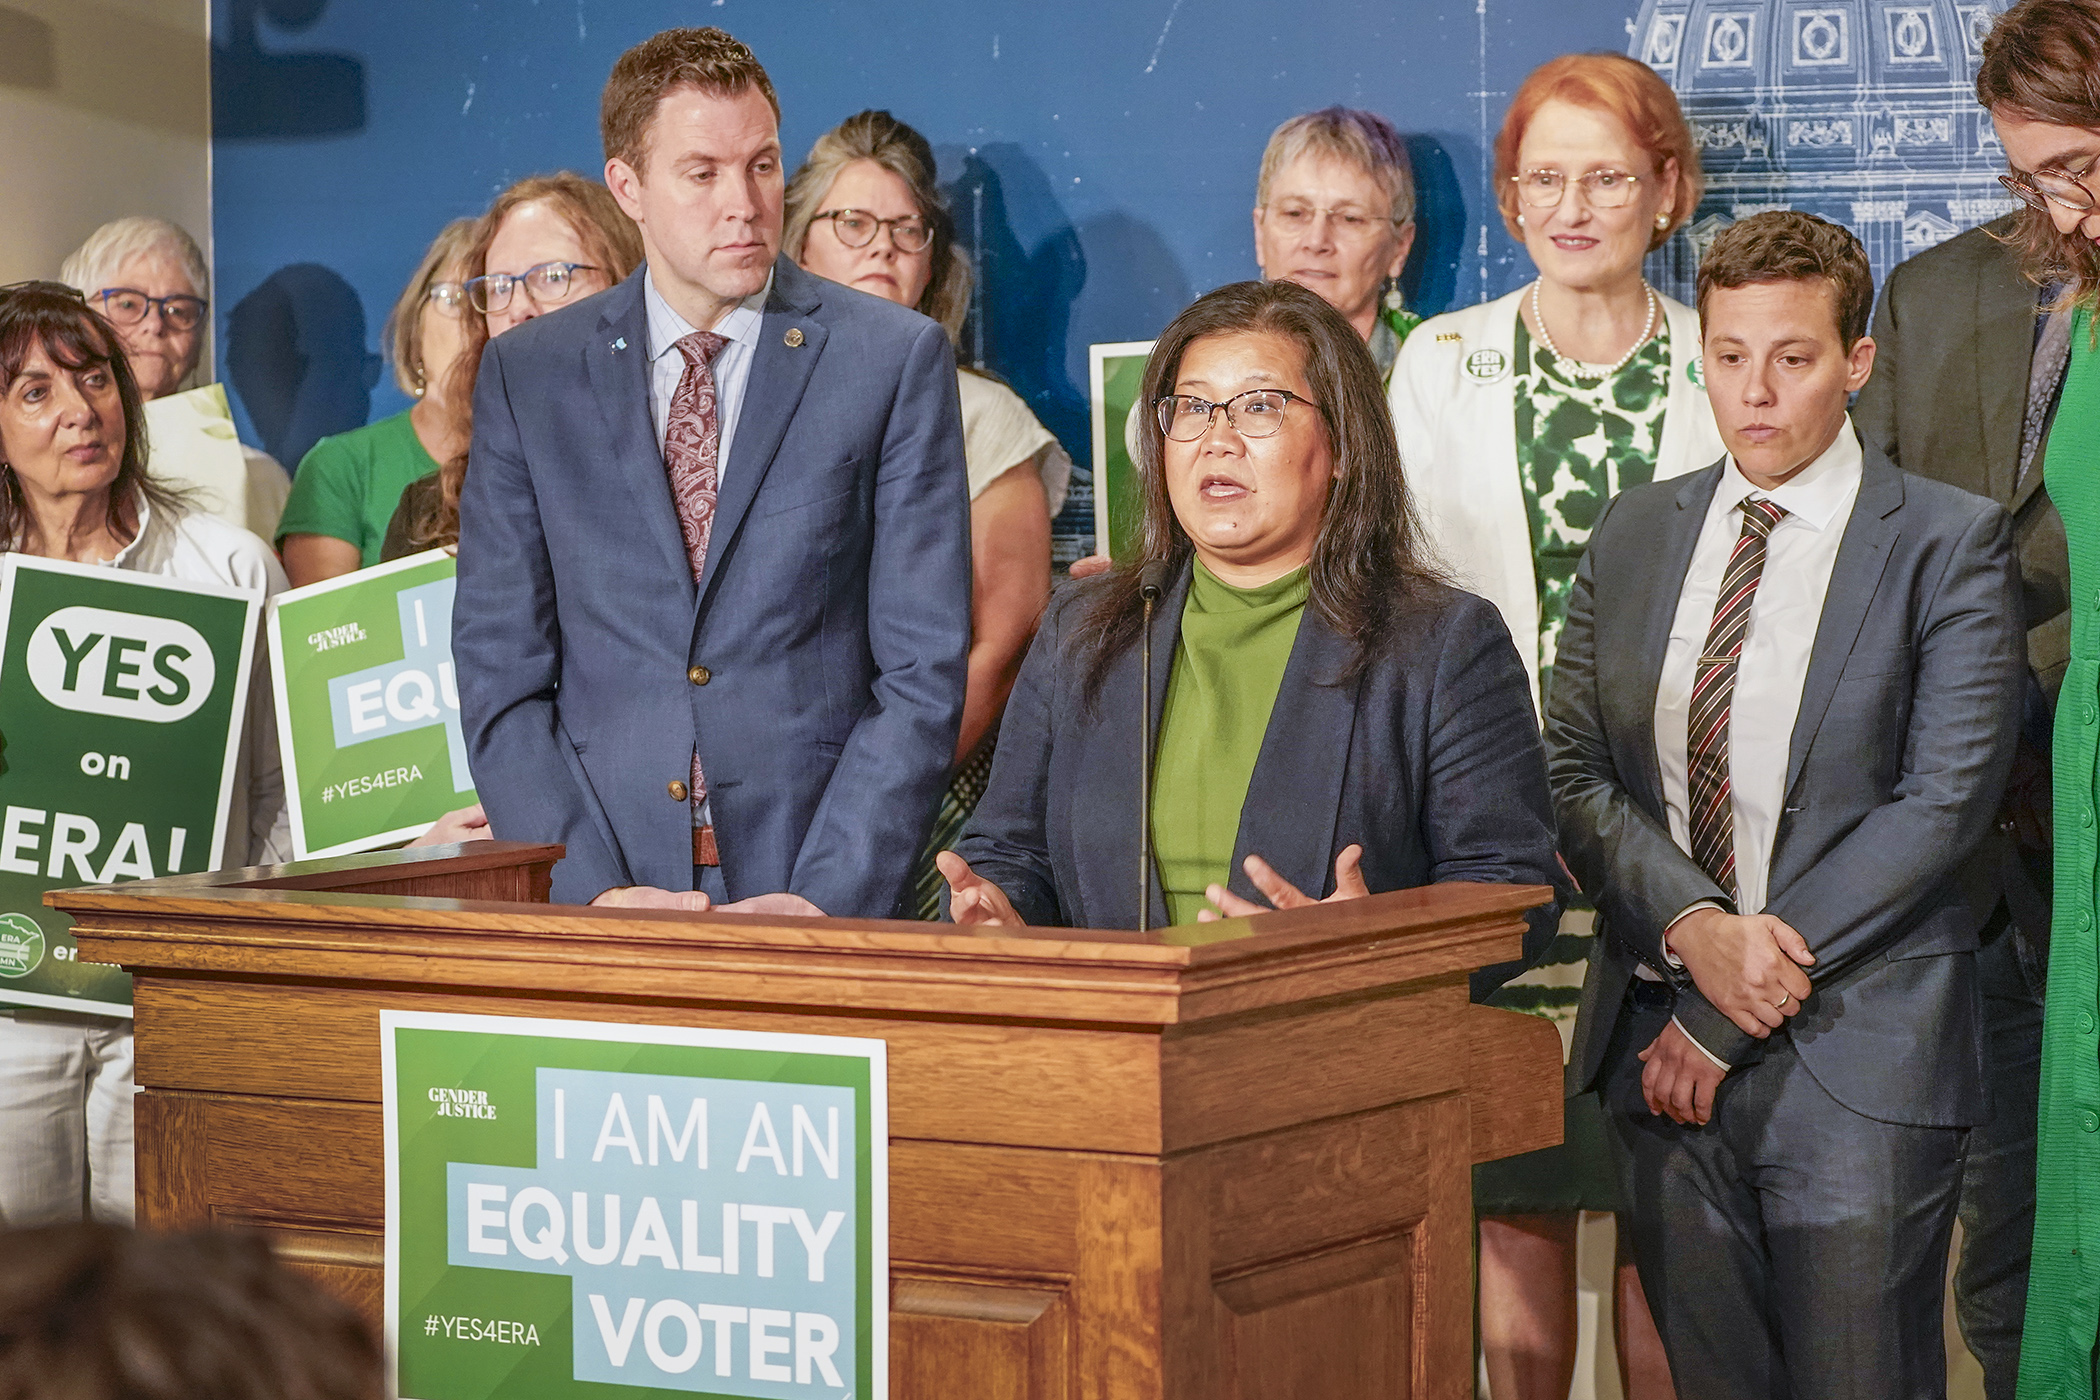 Surrounded by legislators and advocates, Rep. Kaohly Vang Her answers a question at a Monday news conference on a proposed Equal Rights Amendment to state voters in 2026. The House plans to vote on the bill before the day is done. (Photo by Andrew VonBank)